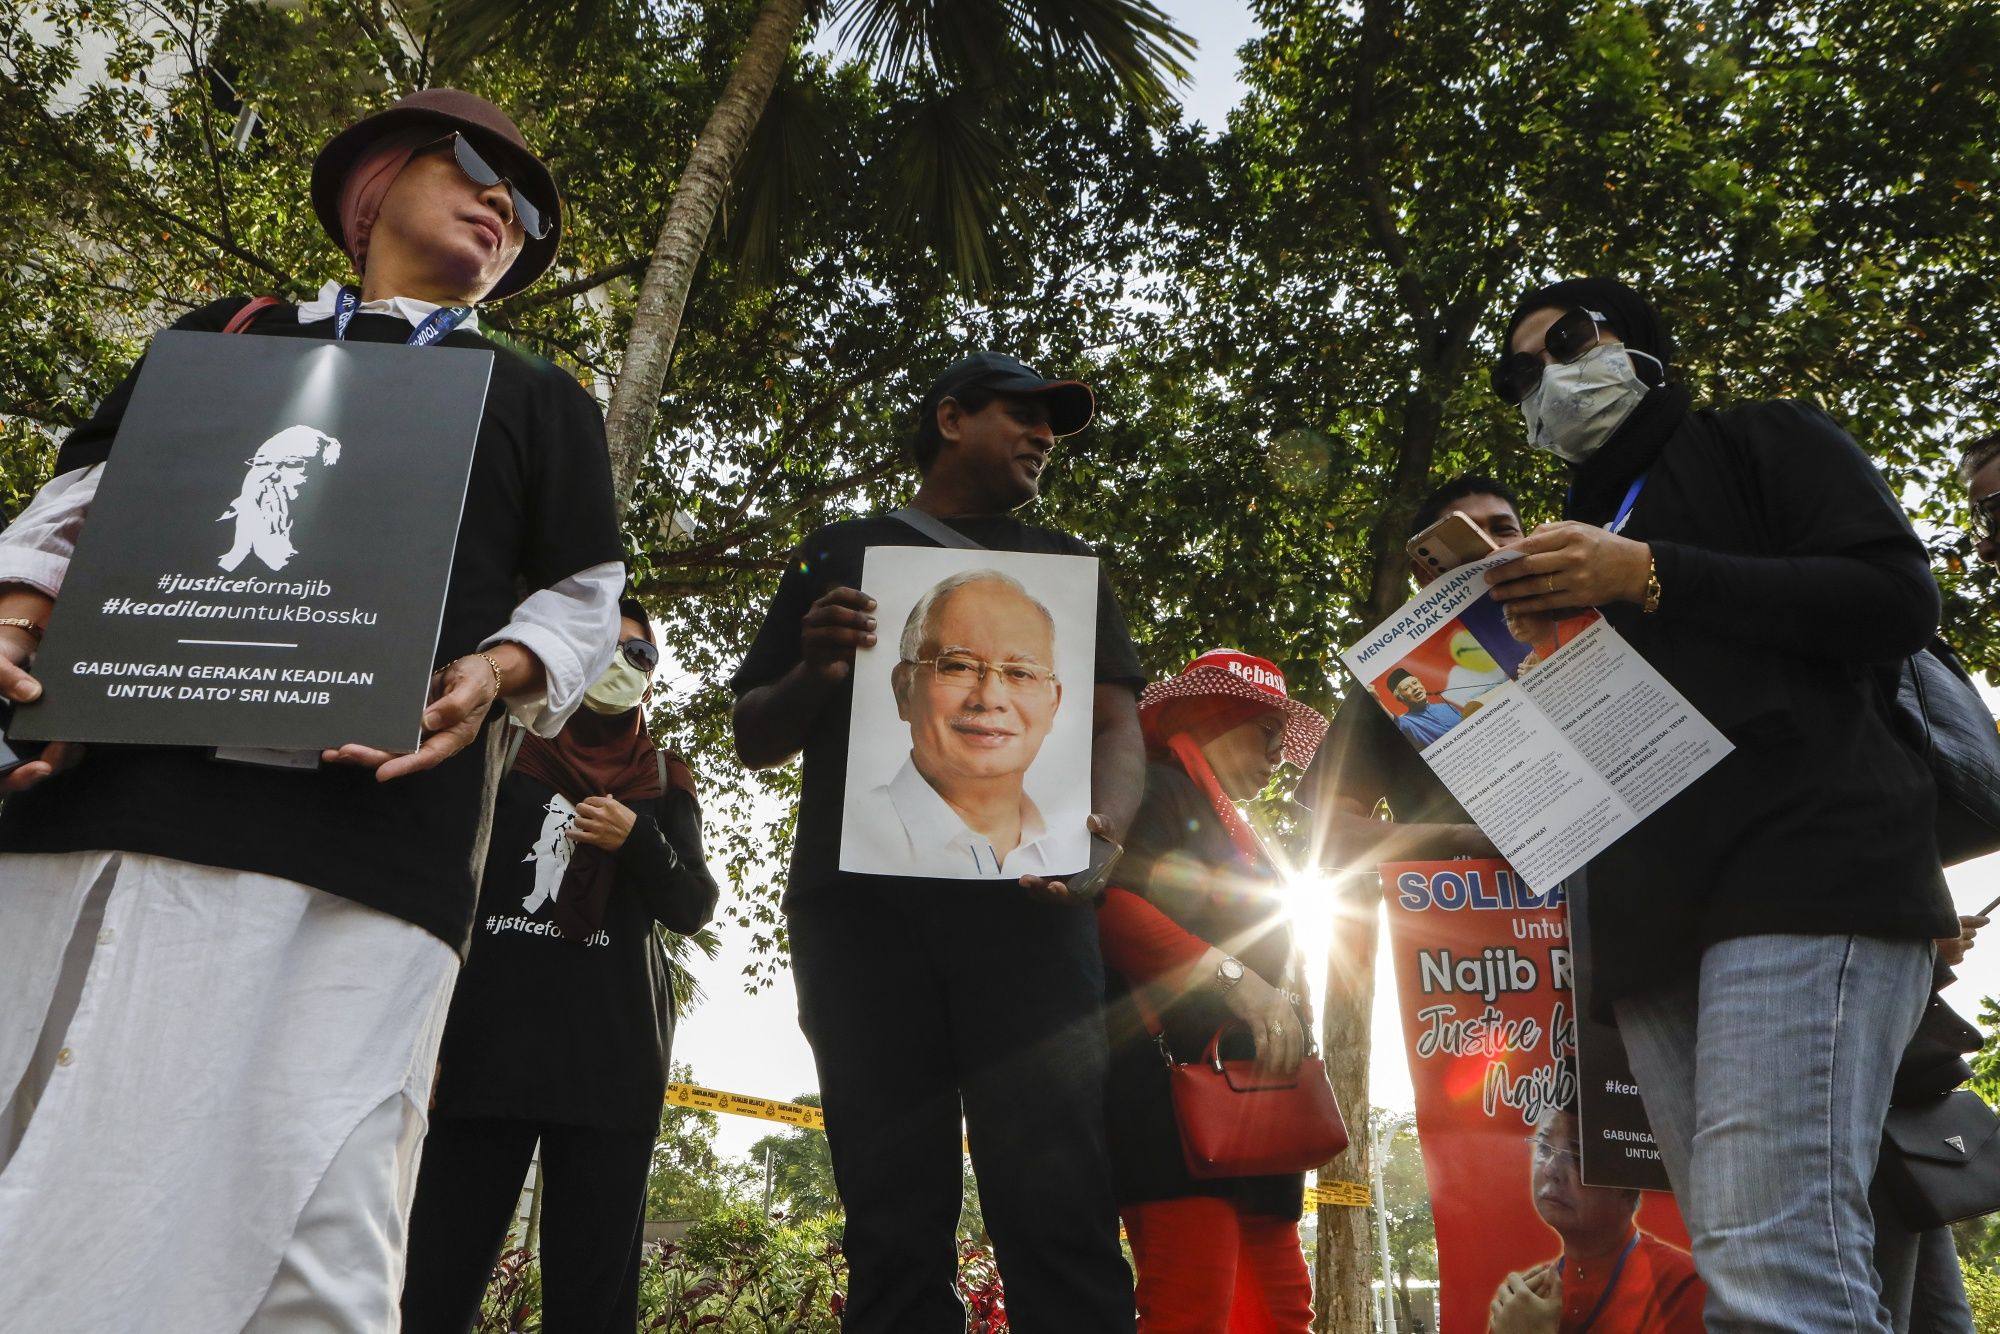 Supporters of former Prime Minister Najib Razak hold placards outside a court of appeal in Putrajaya ahead of an appeal hearing earlier this year. Grass-roots members of the parties in Anwar’s unity government have a hard time playing nice with their long-time rivals, analysts say. Photo: Bloomberg